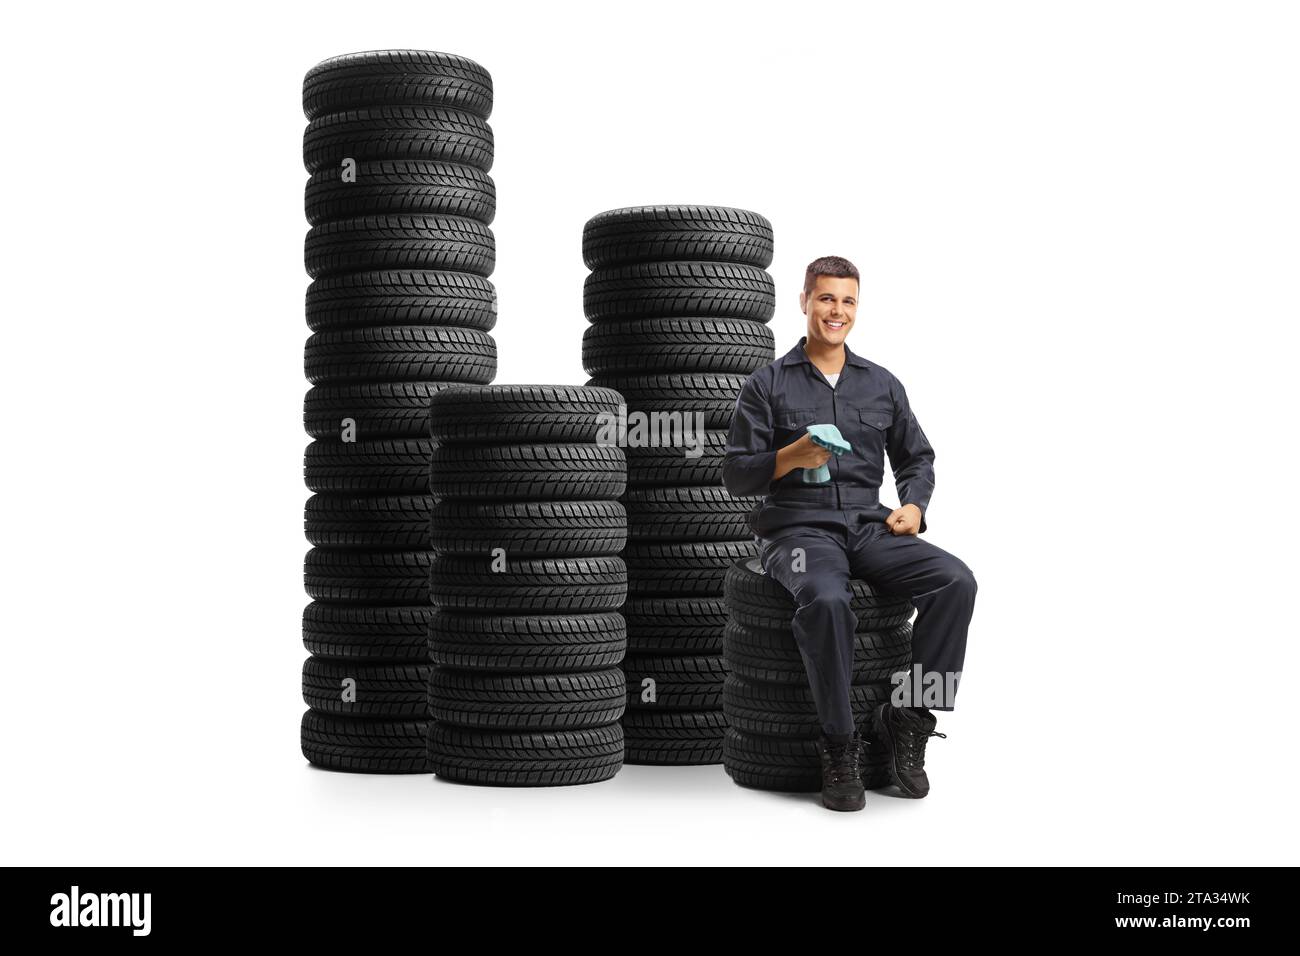 Auto mechanic smiling and sitting with piles of tires isolated on white background Stock Photo